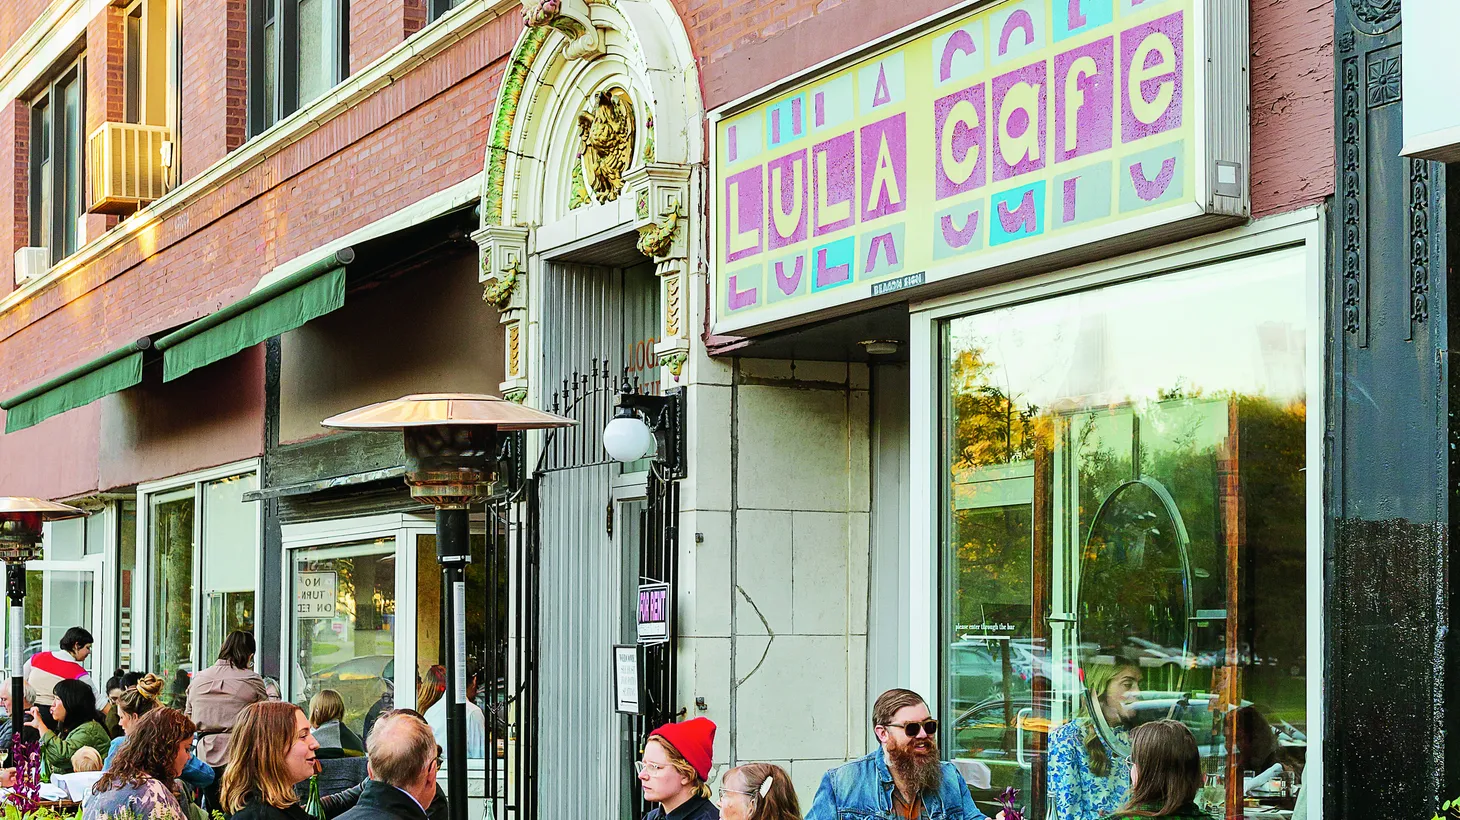 Lula Cafe opened in Chicago's Logan Square in 1999 and has become a favorite among locals as well as industry insiders.